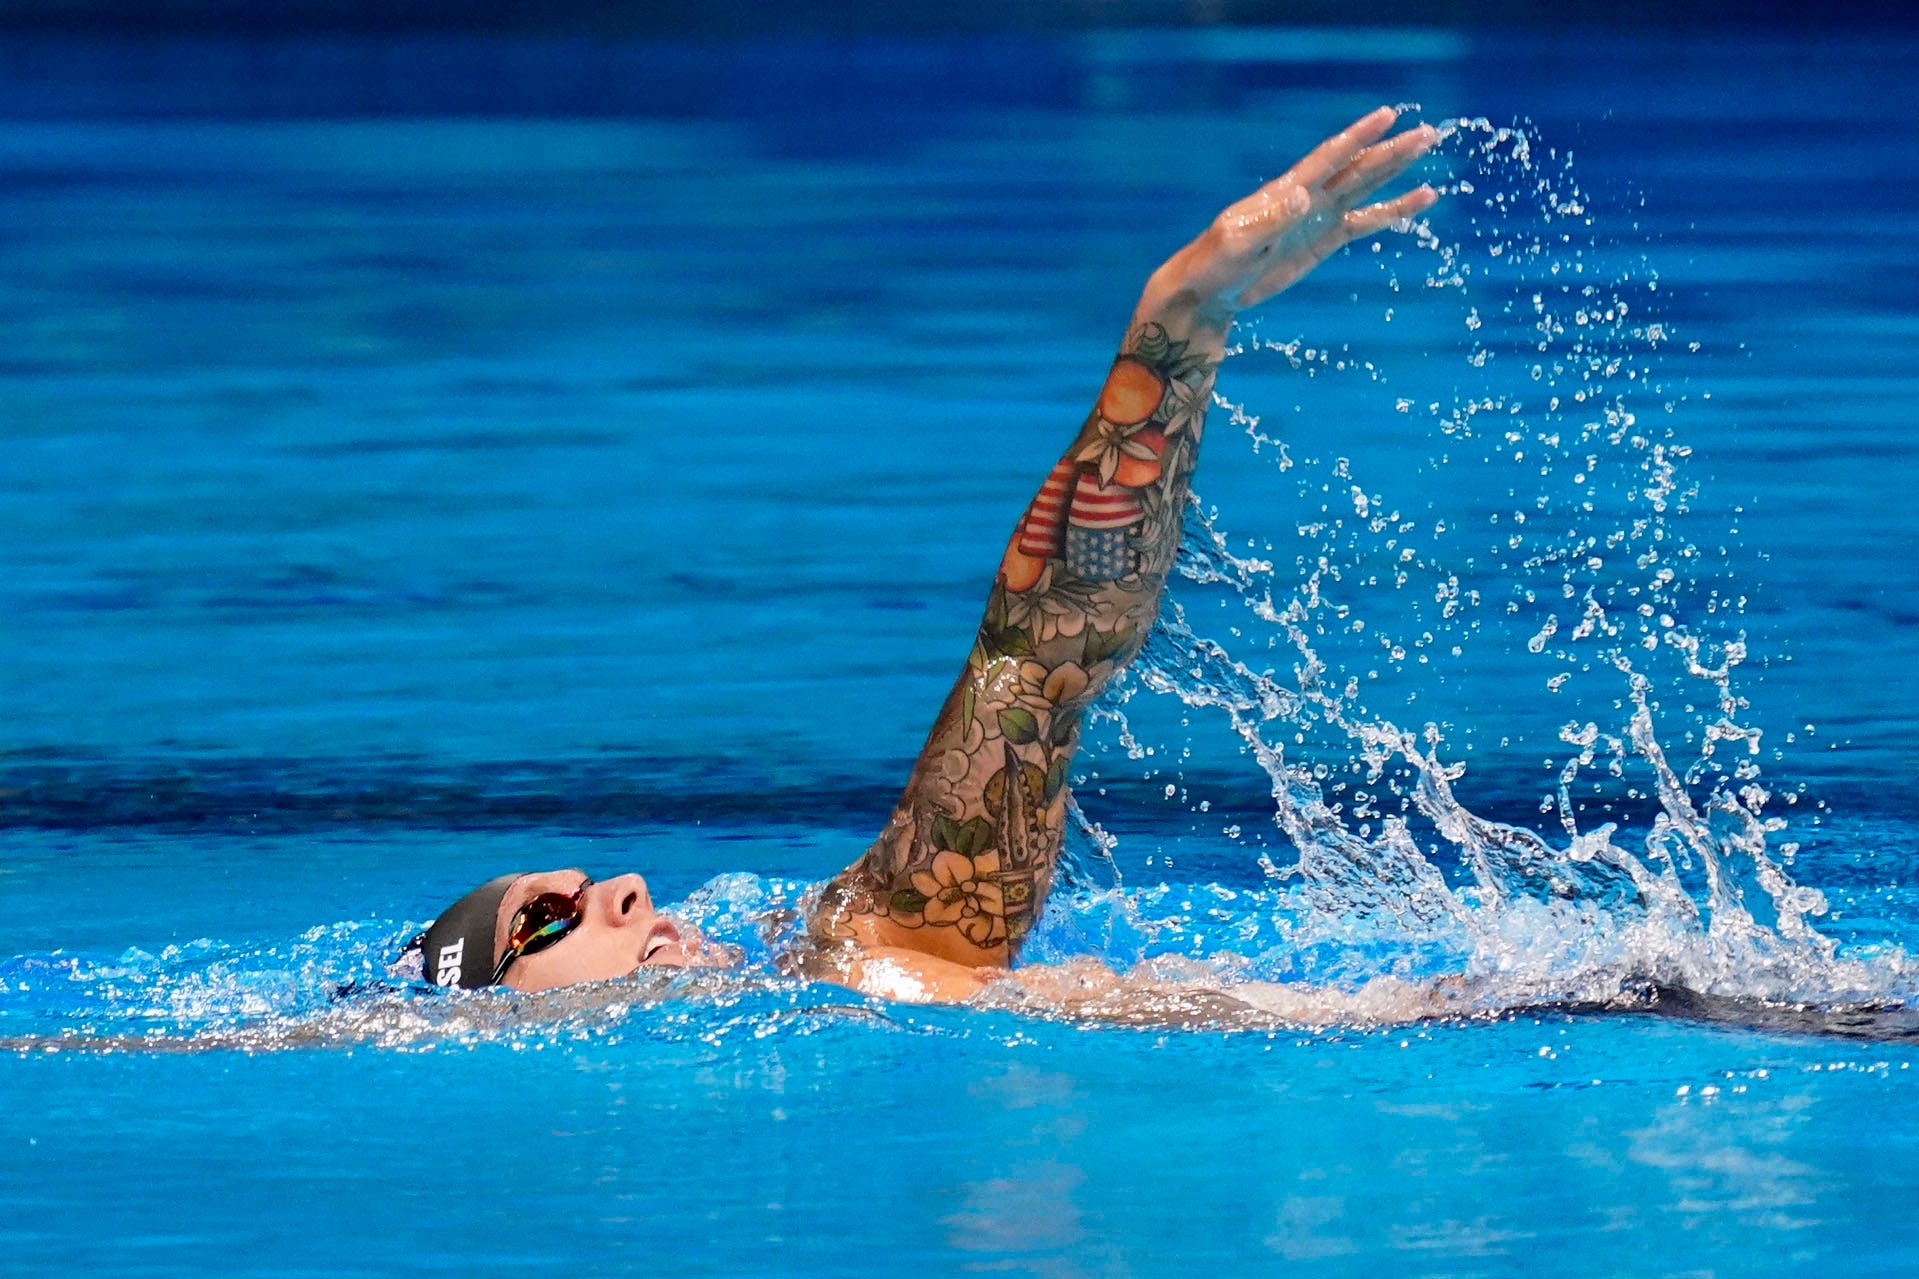 July 31, 2021: Caeleb Dressel (USA) cools down after winning the men's 50 freestyle semifinal during the Tokyo 2020 Olympic Summer Games at Tokyo Aquatics Centre.